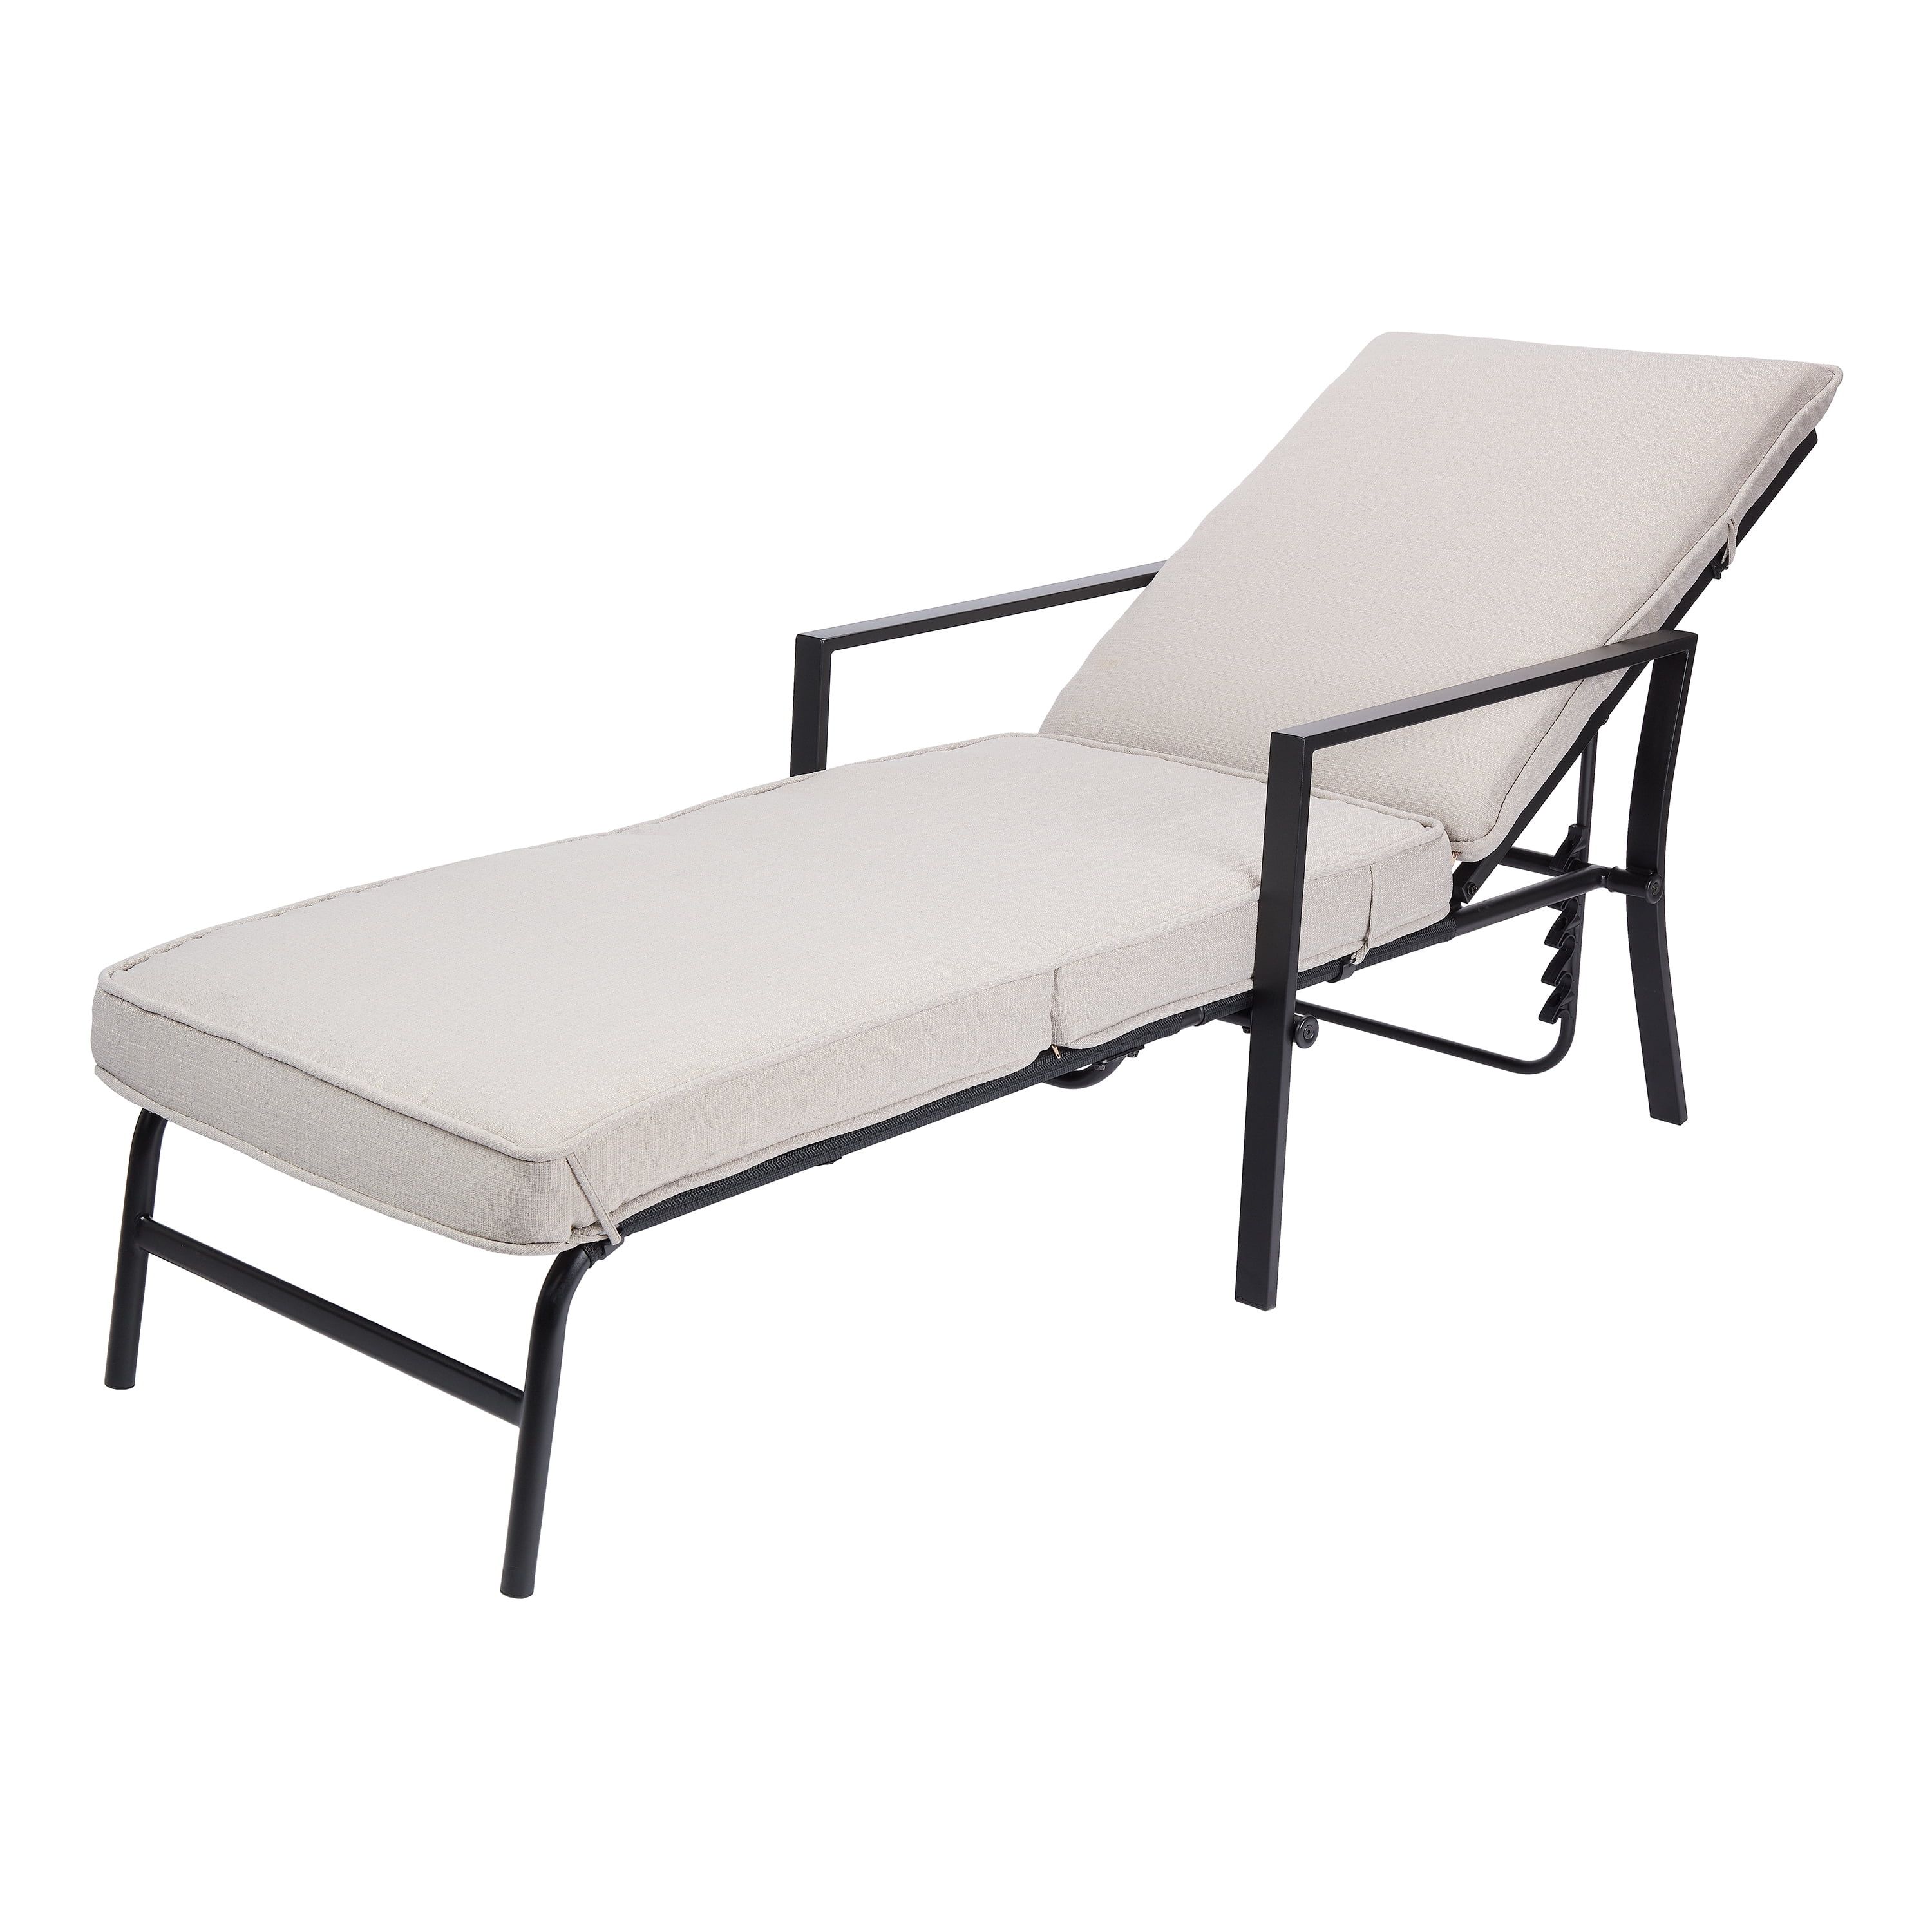 Mainstays Richmond Hills Outdoor Chaise Lounge with Gray Cushions | Walmart (US)